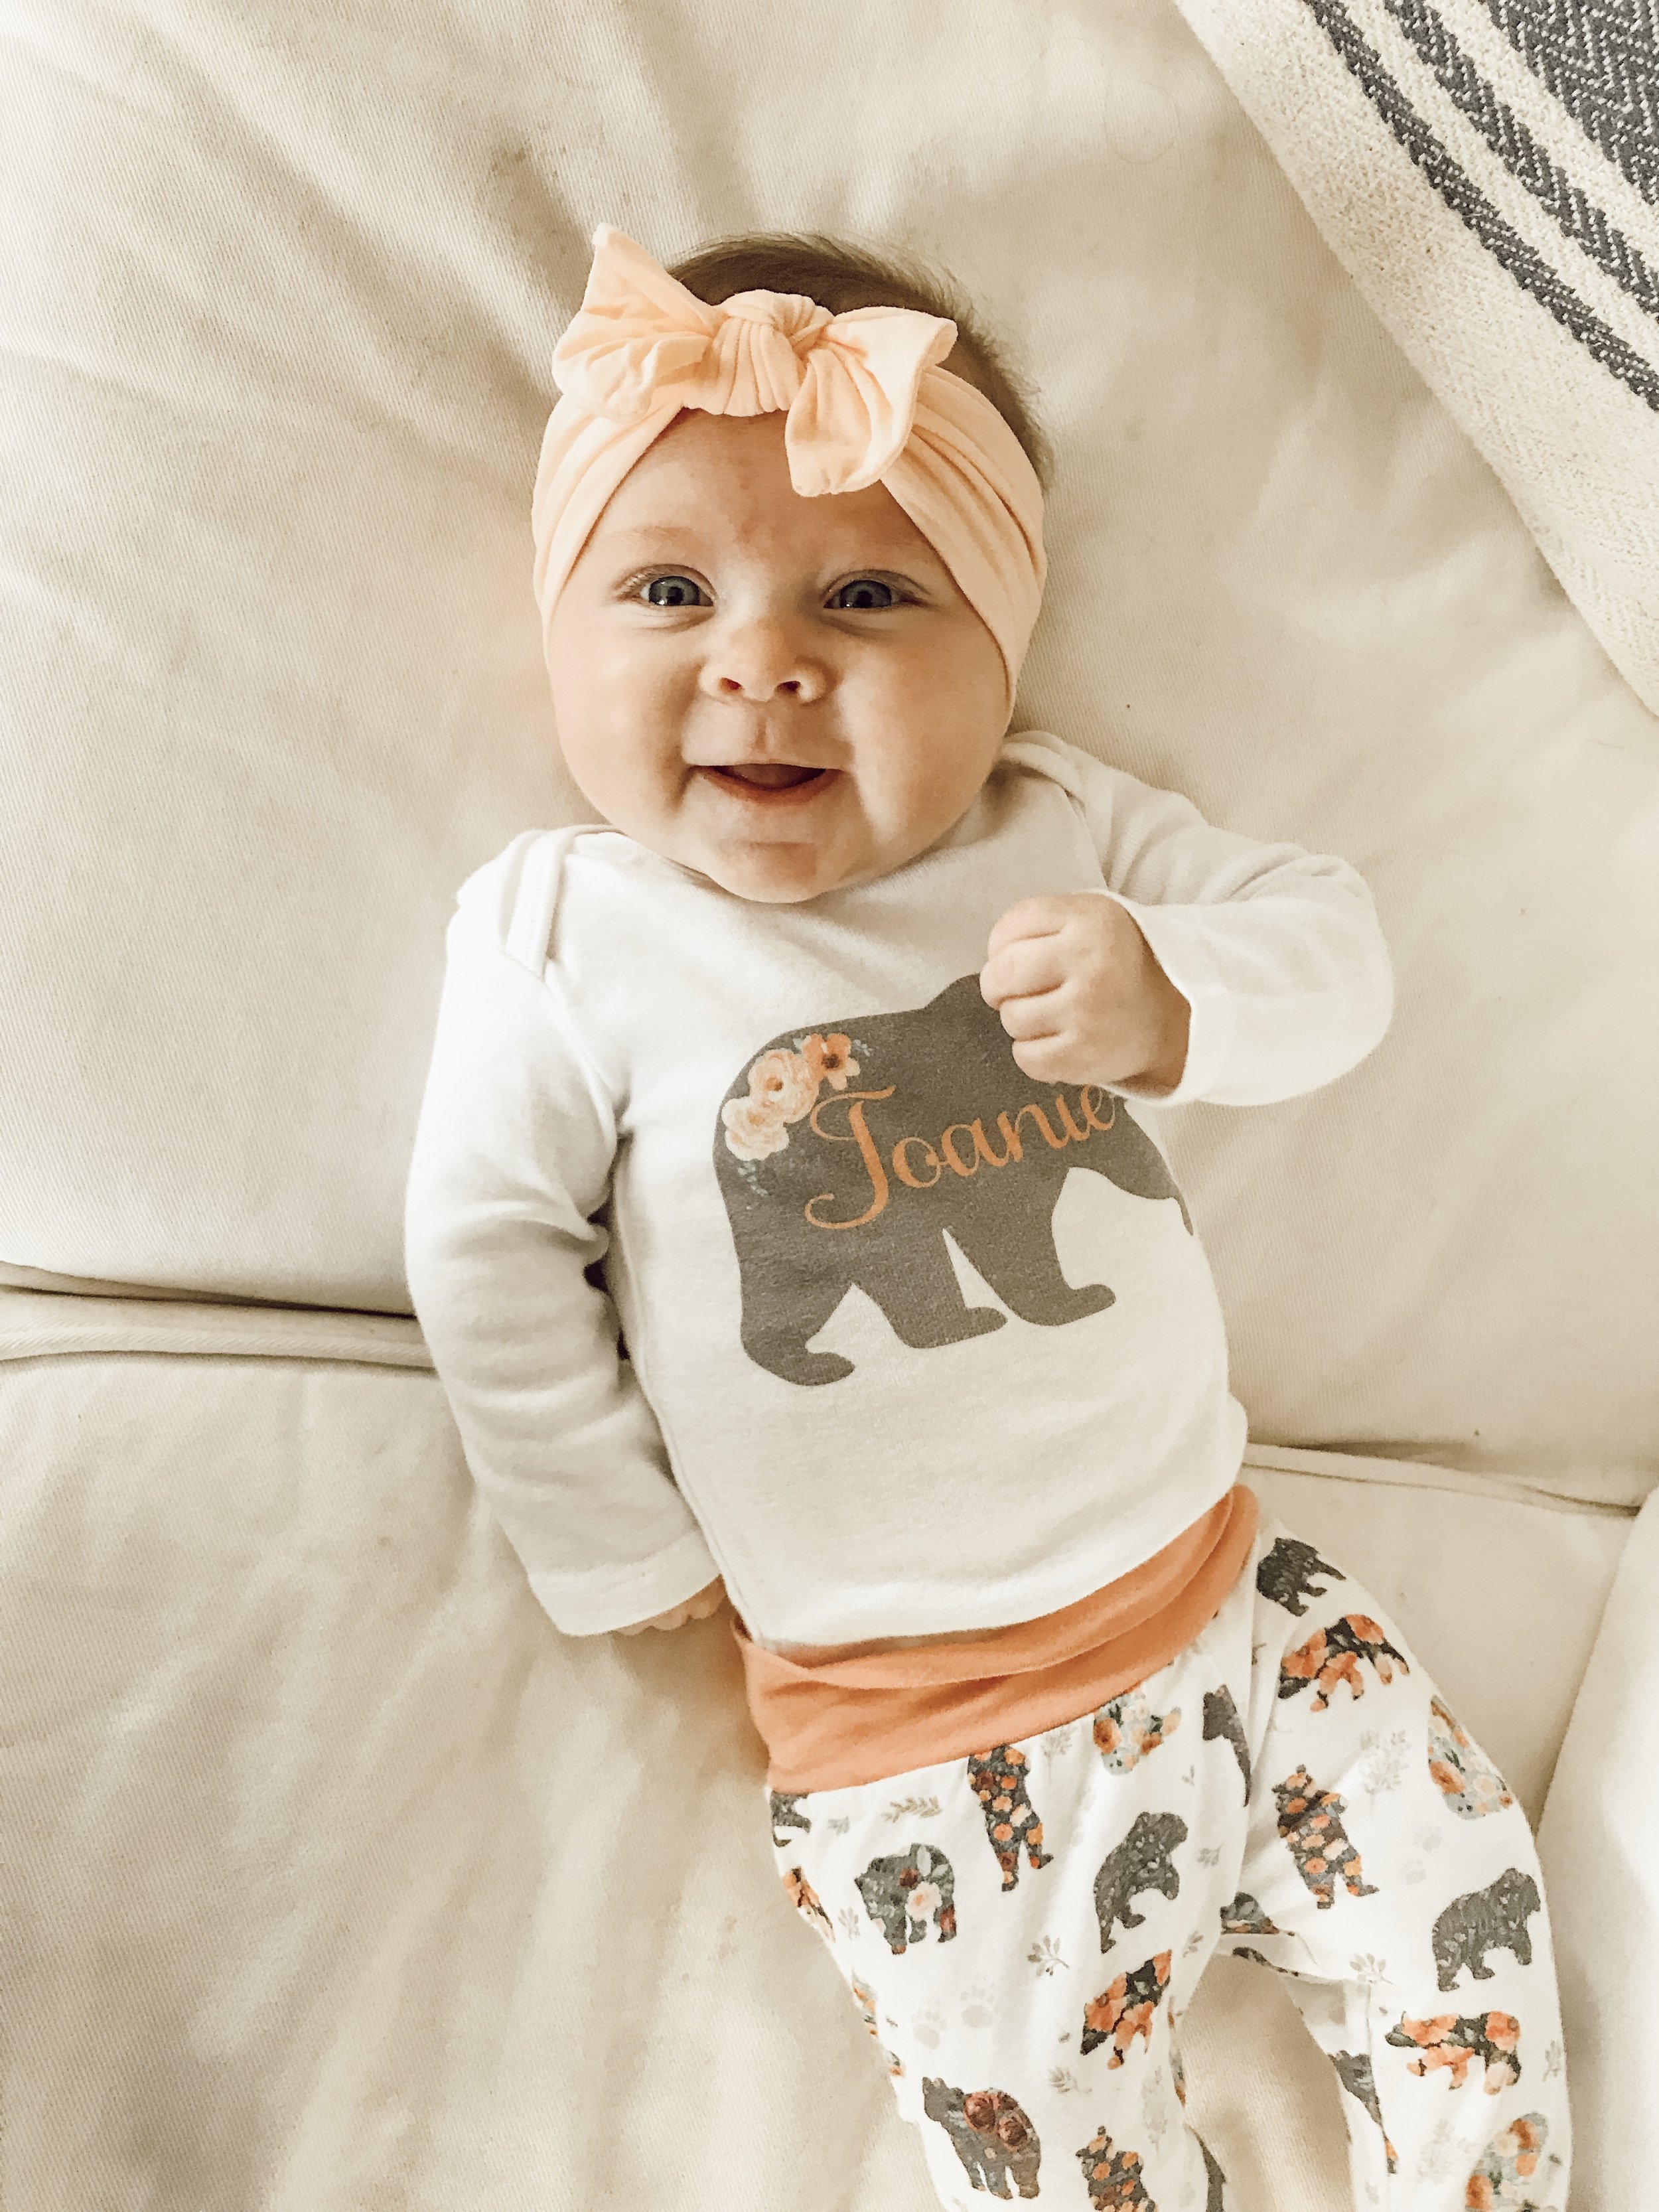 Must Have Baby Items: 6-12 Months — Home With Joanie